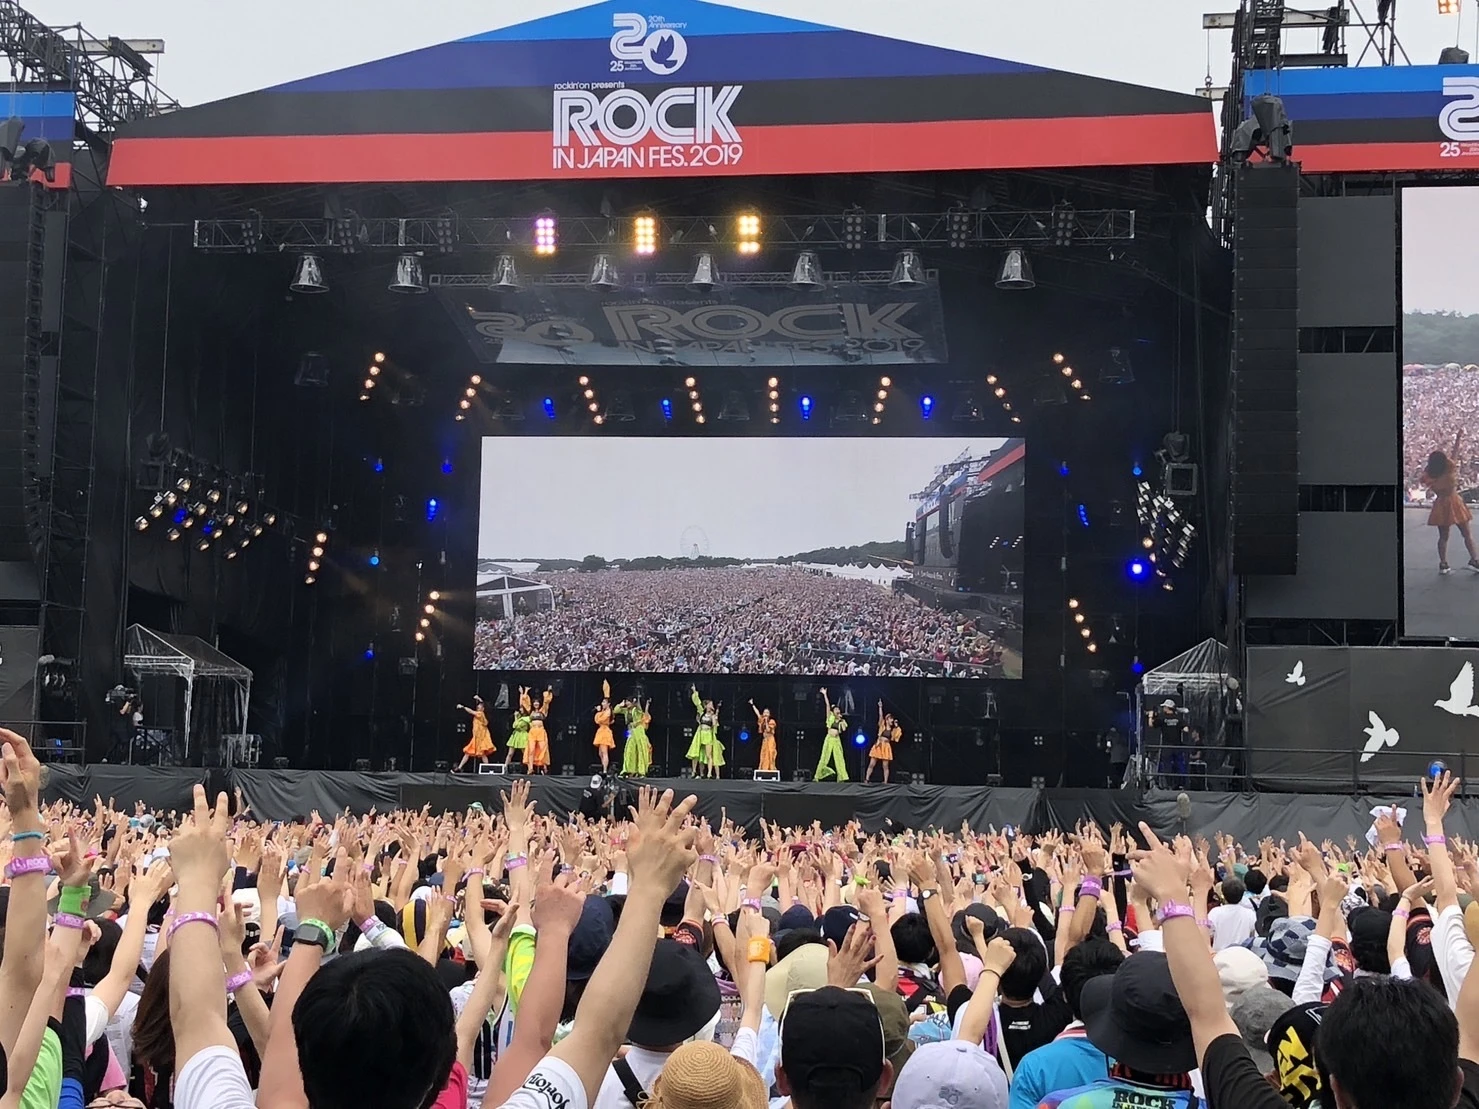 ROCK IN JAPAN FESTIVAL 2019のGRASS STAGEでのパフォーマンスショット